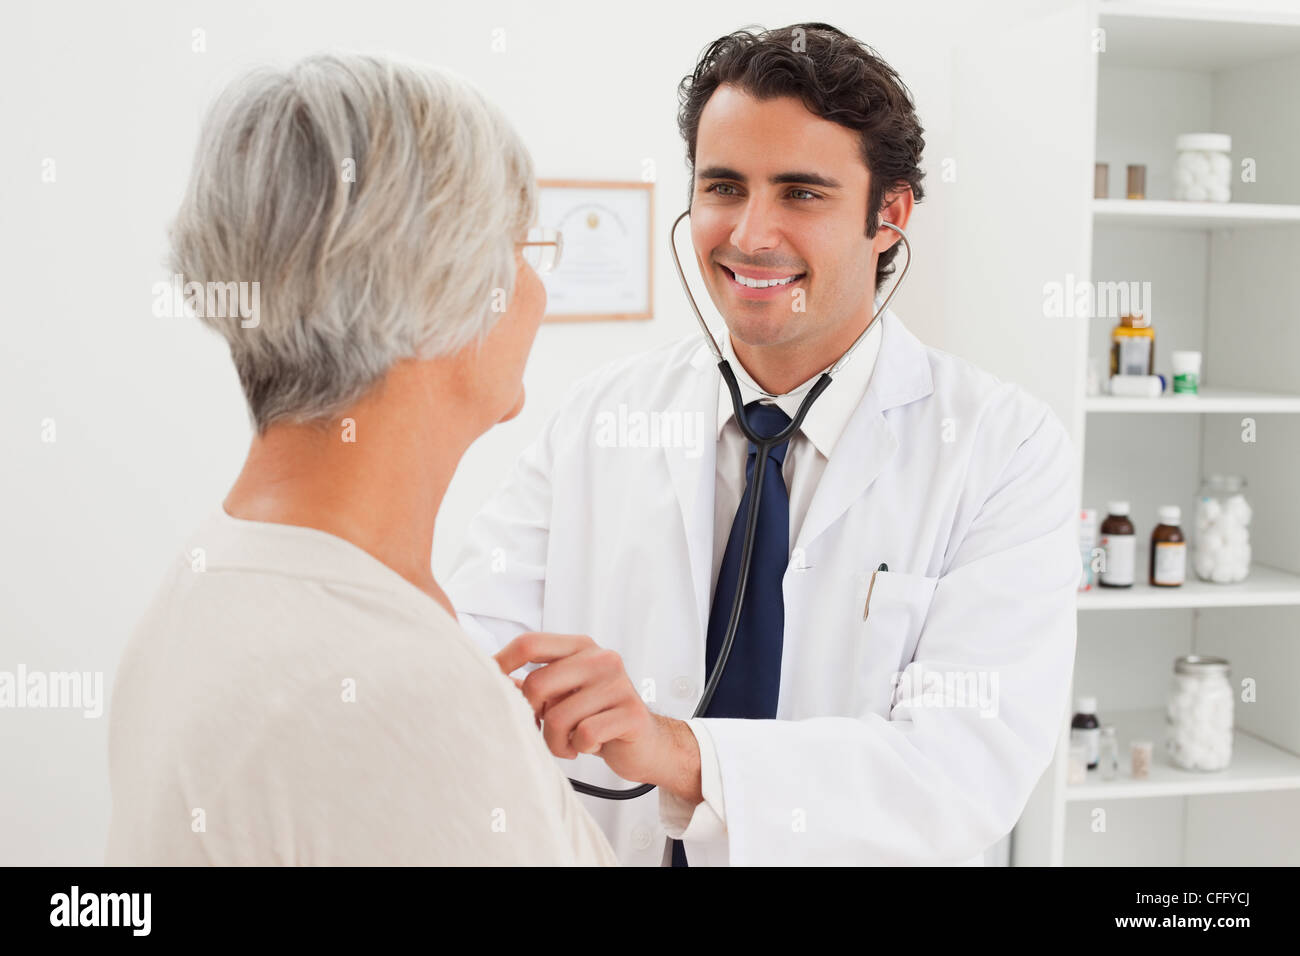 Smiling doctor taking mature patients heart beat Stock Photo